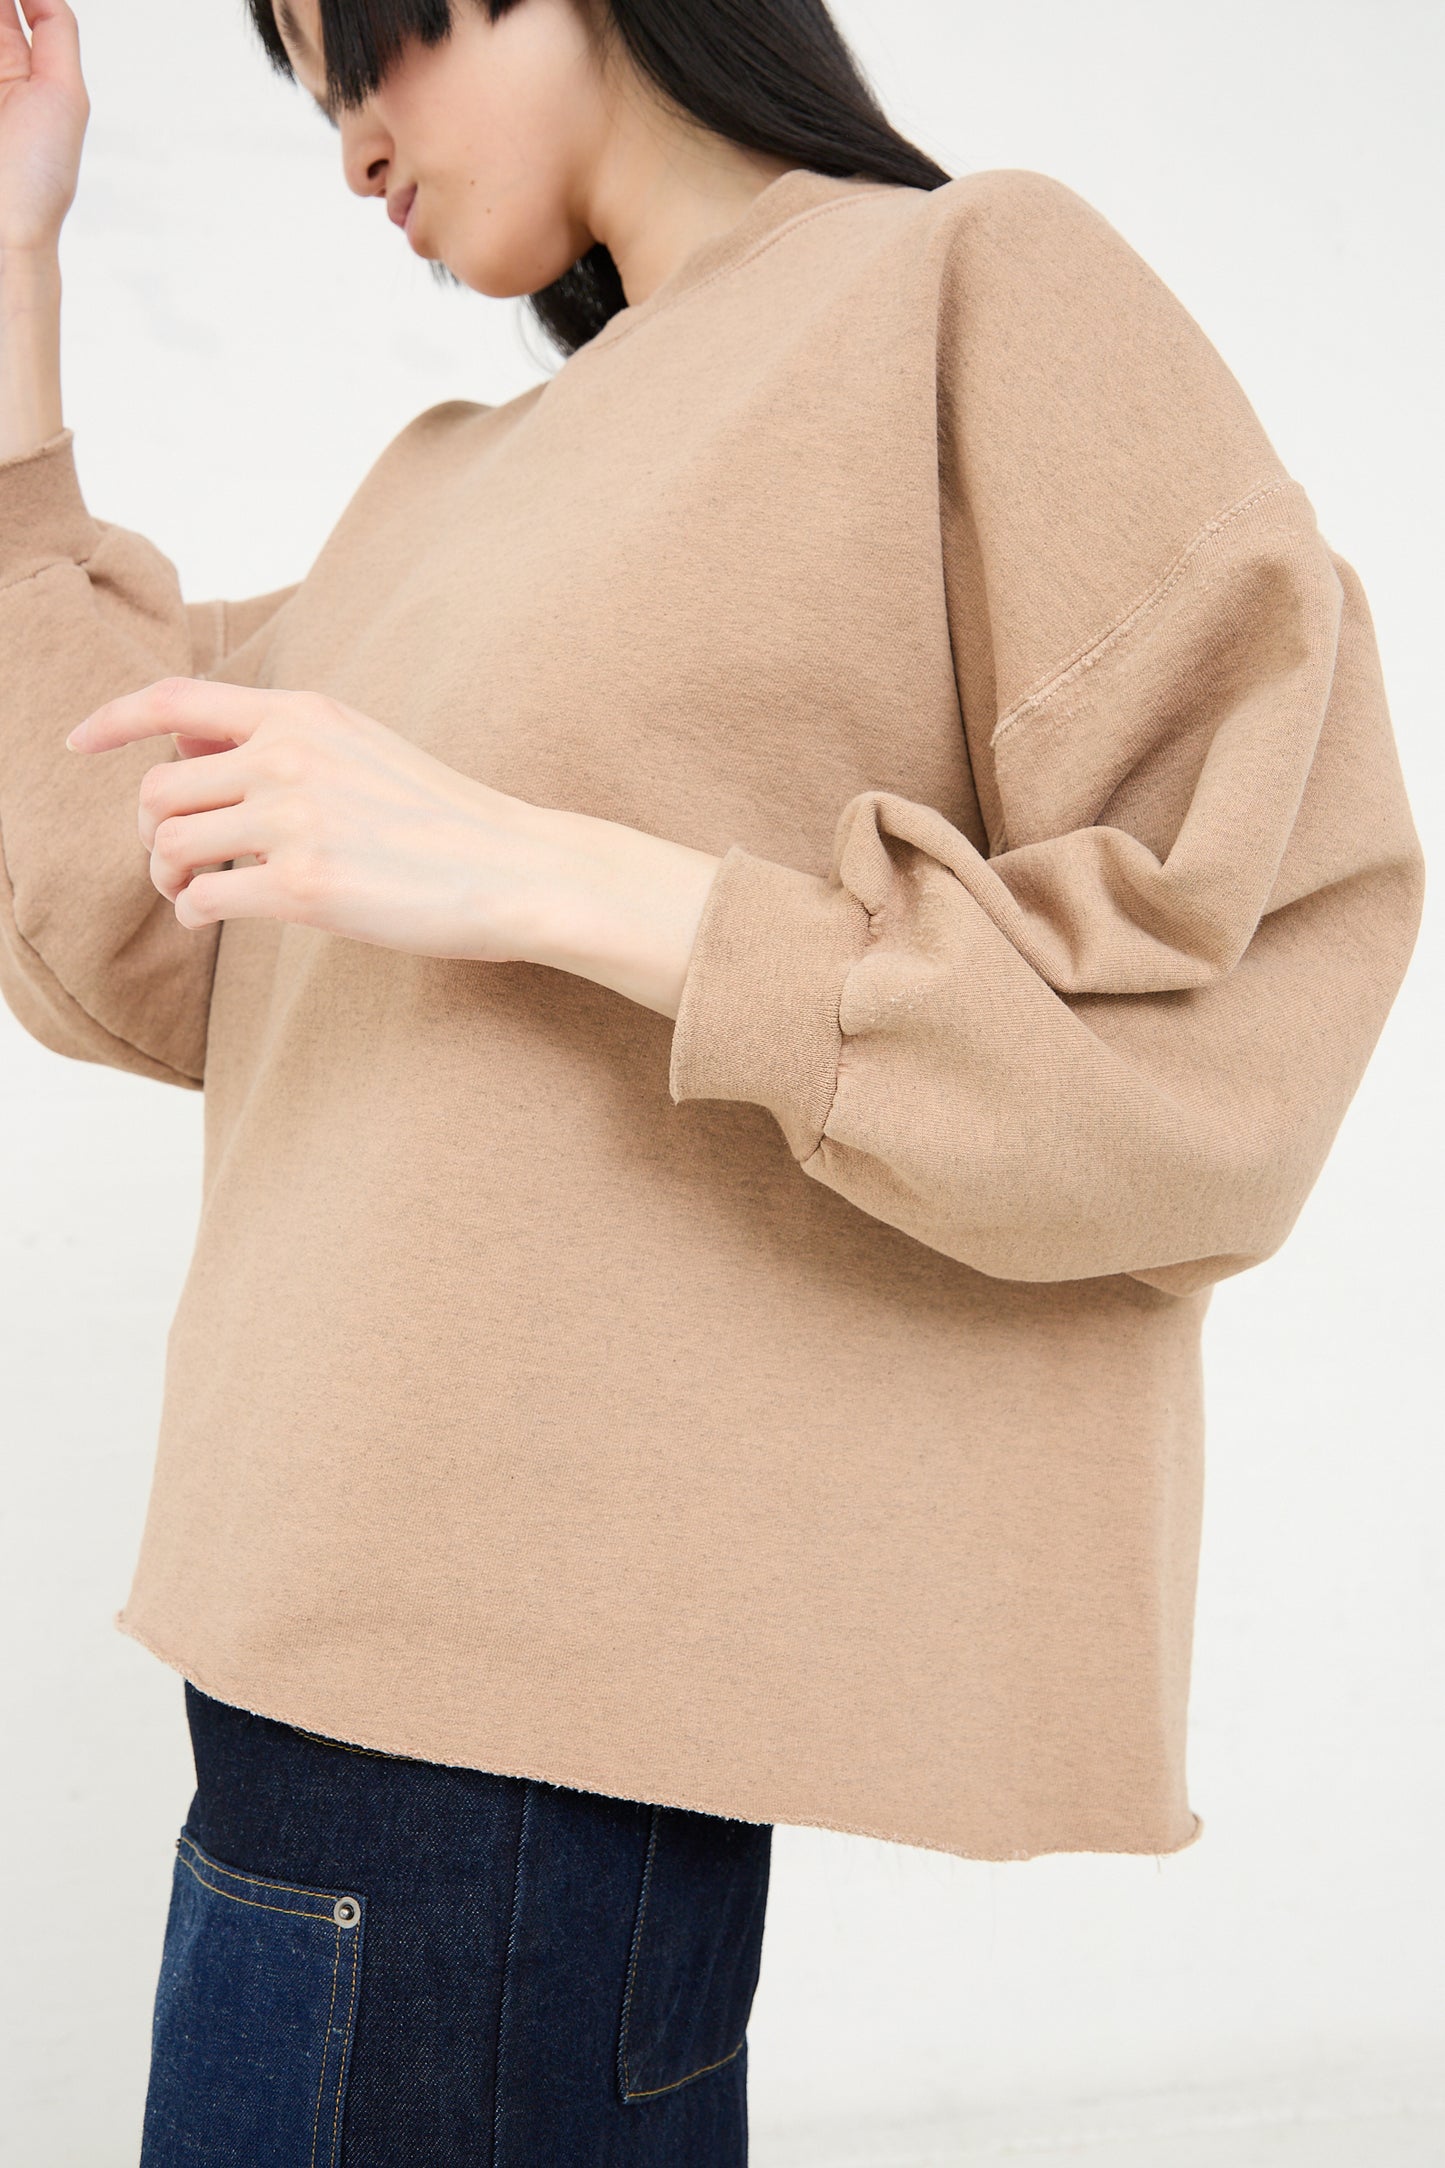 A person wearing an oversized, beige Rachel Comey sweatshirt with puffy sleeves and blue jeans.